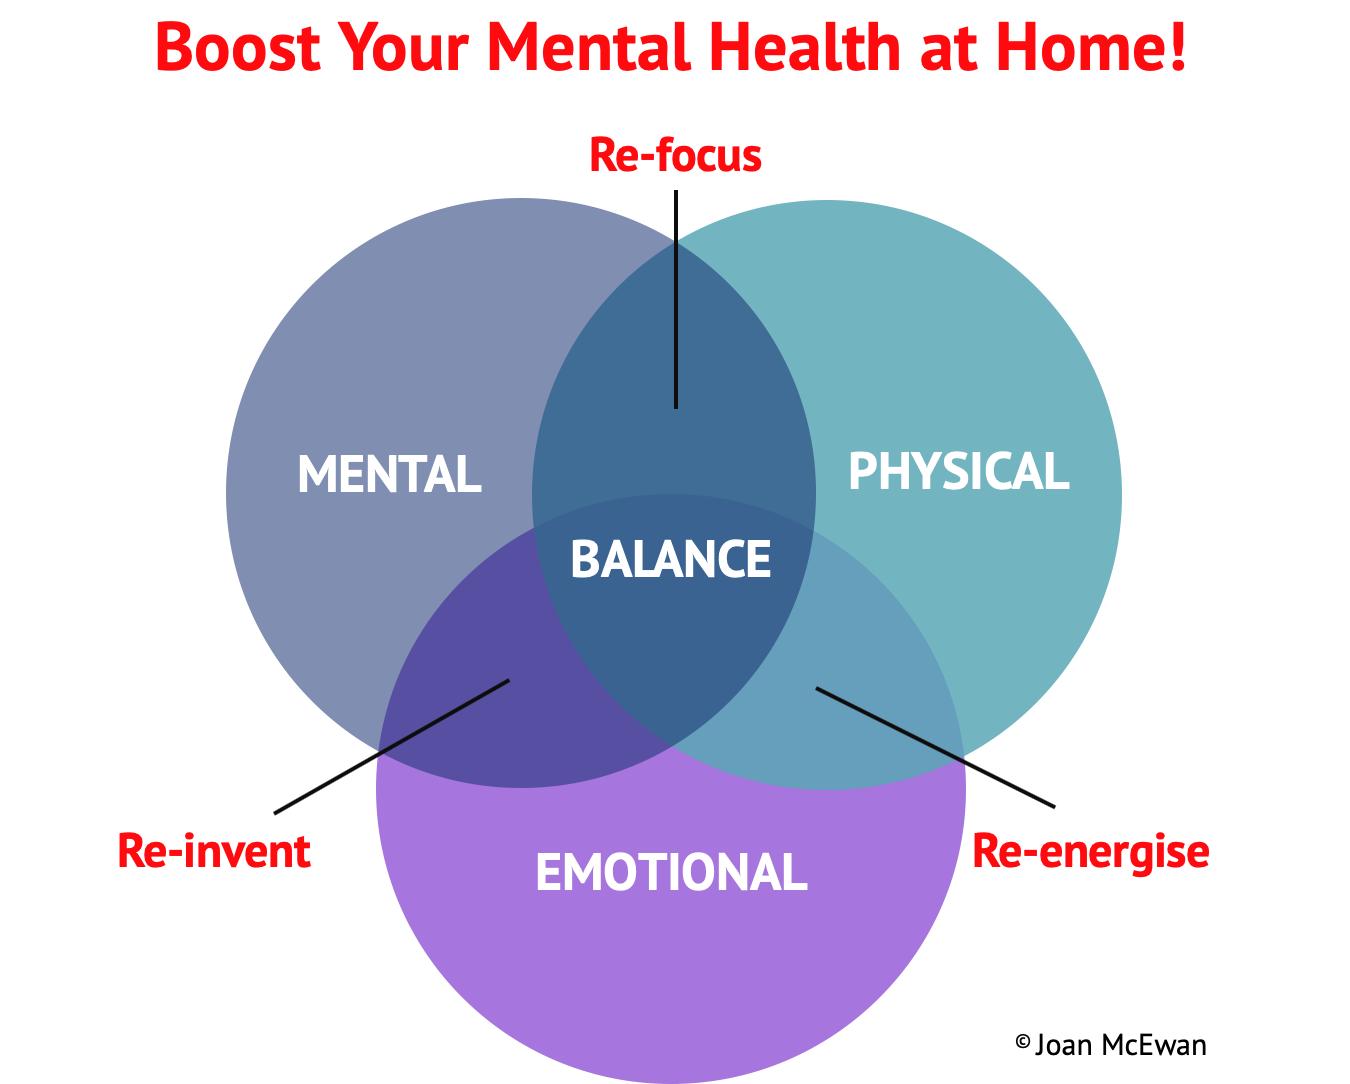 BOOST YOUR MENTAL HEALTH AT HOME!